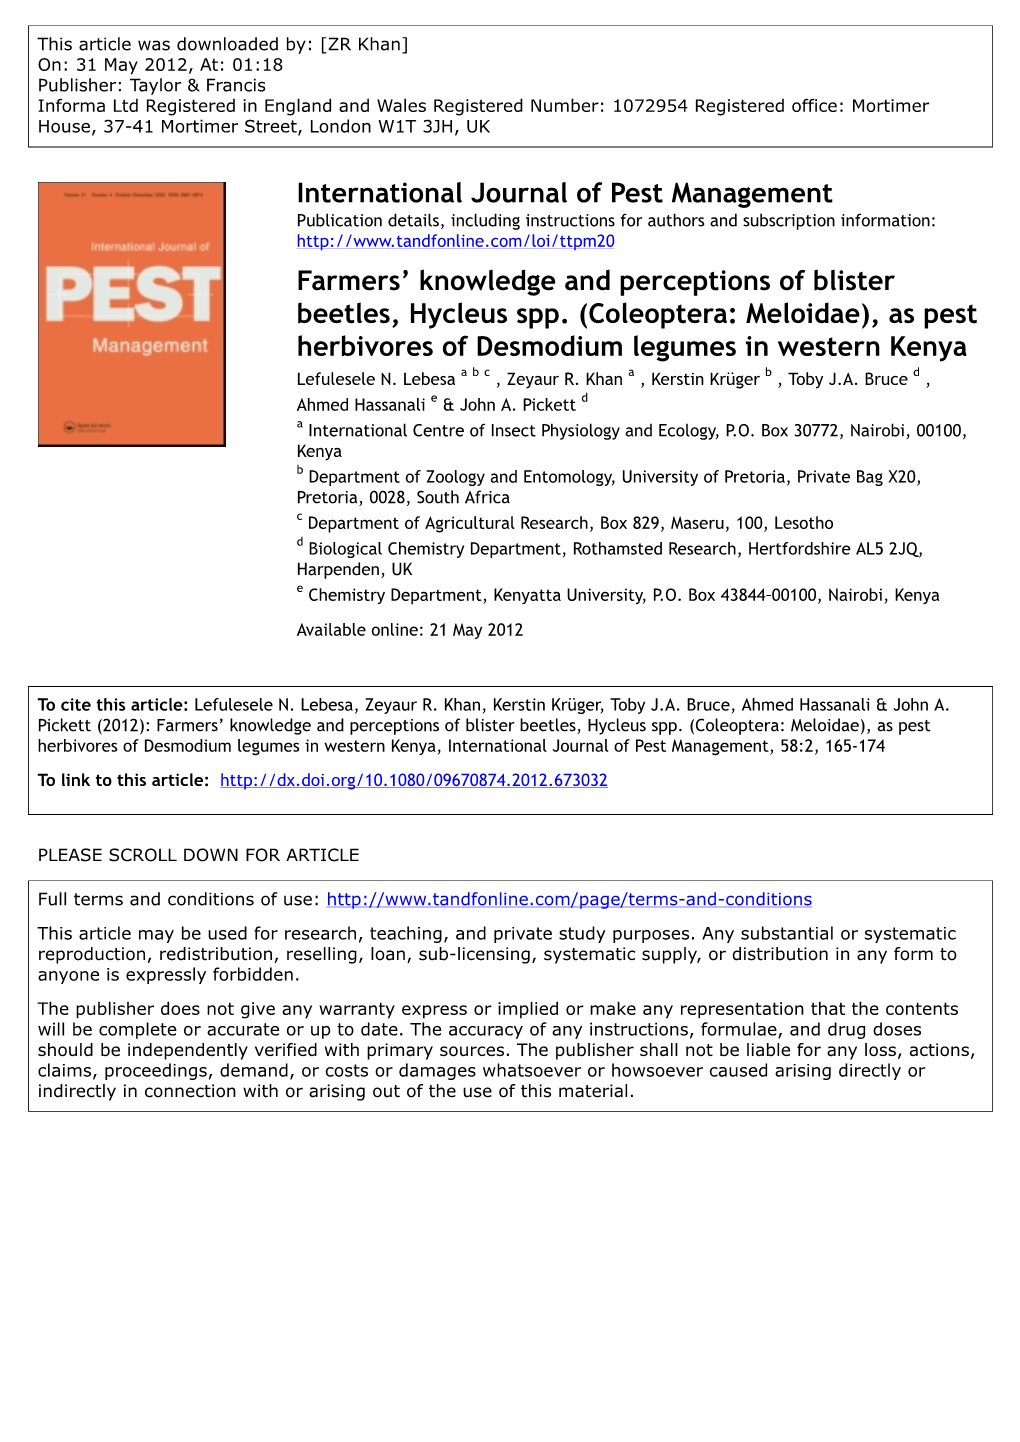 Farmers' Knowledge and Perceptions of Blister Beetles, Hycleus Spp